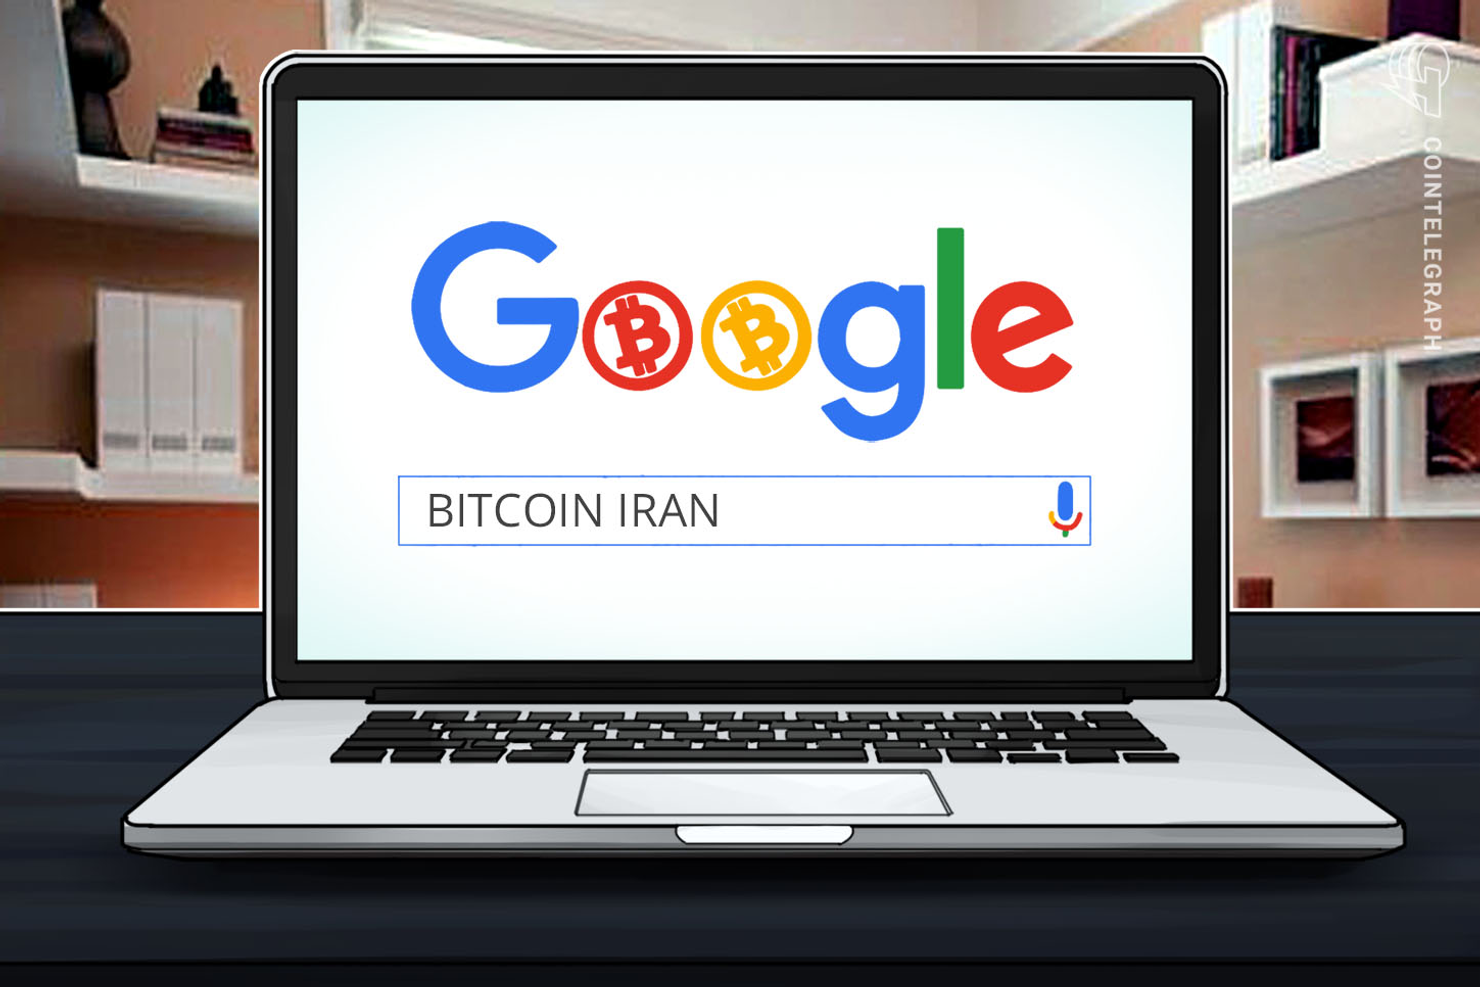 Google Trends Sees ‘Bitcoin Iran’ Surge 4,500% on Safe Haven Narrative